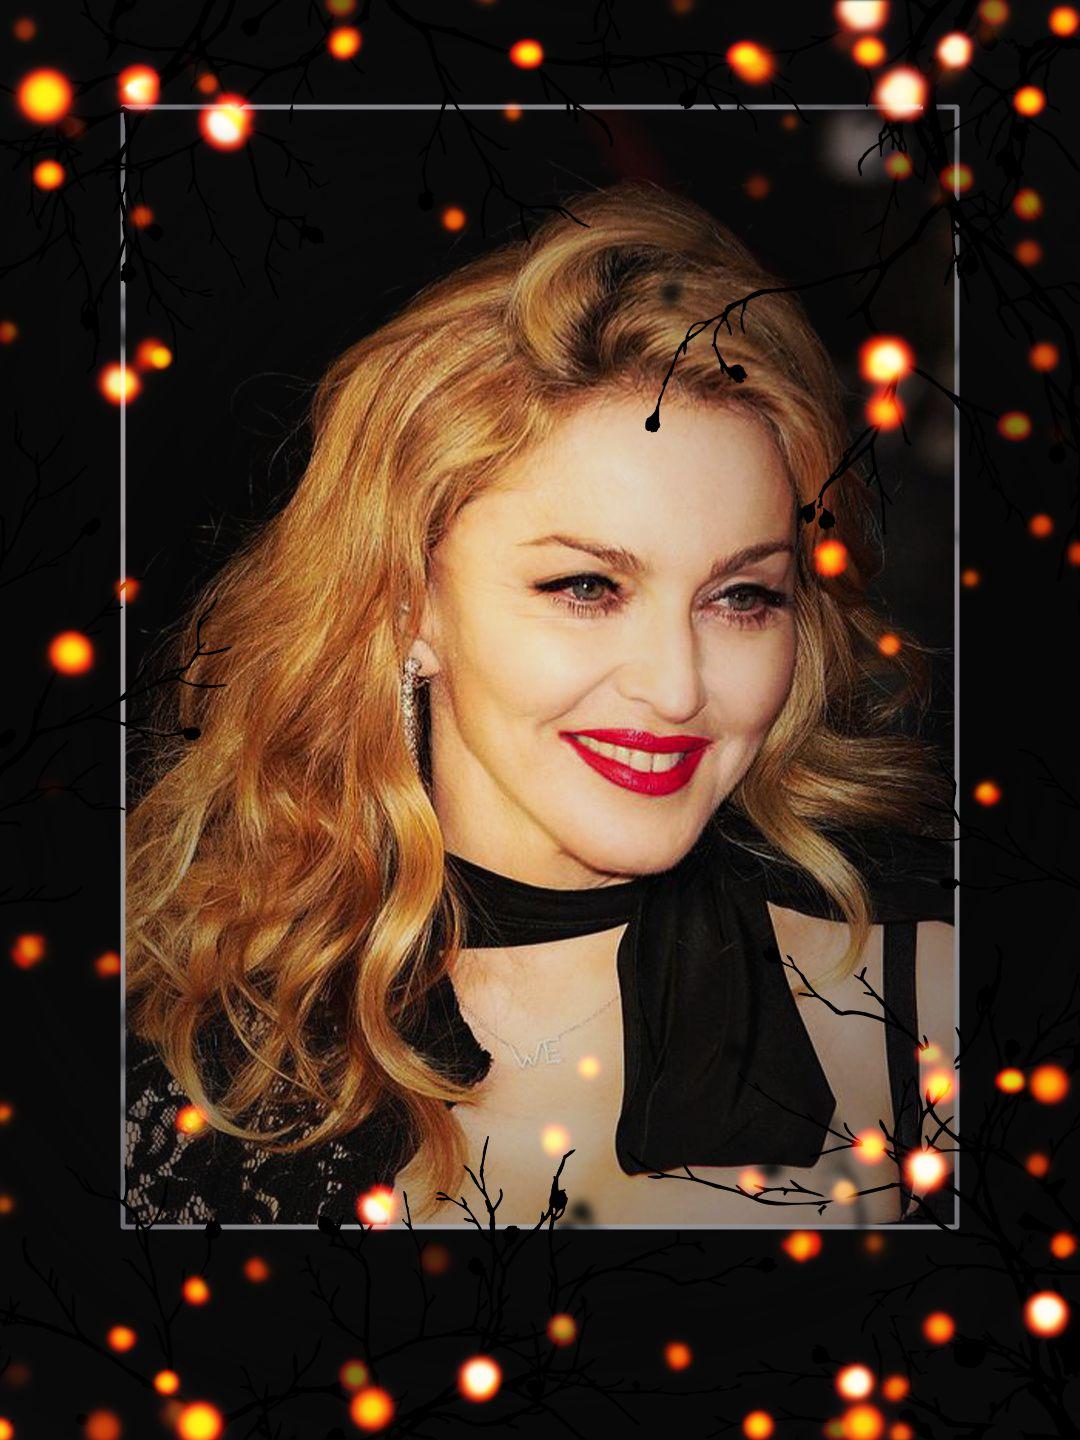 Naughty America Hq Com - Madonna # 41 - Celeb ART - Beautiful Artworks of Celebrities, Footballers,  Politicians and Famous People in World | OpenSea